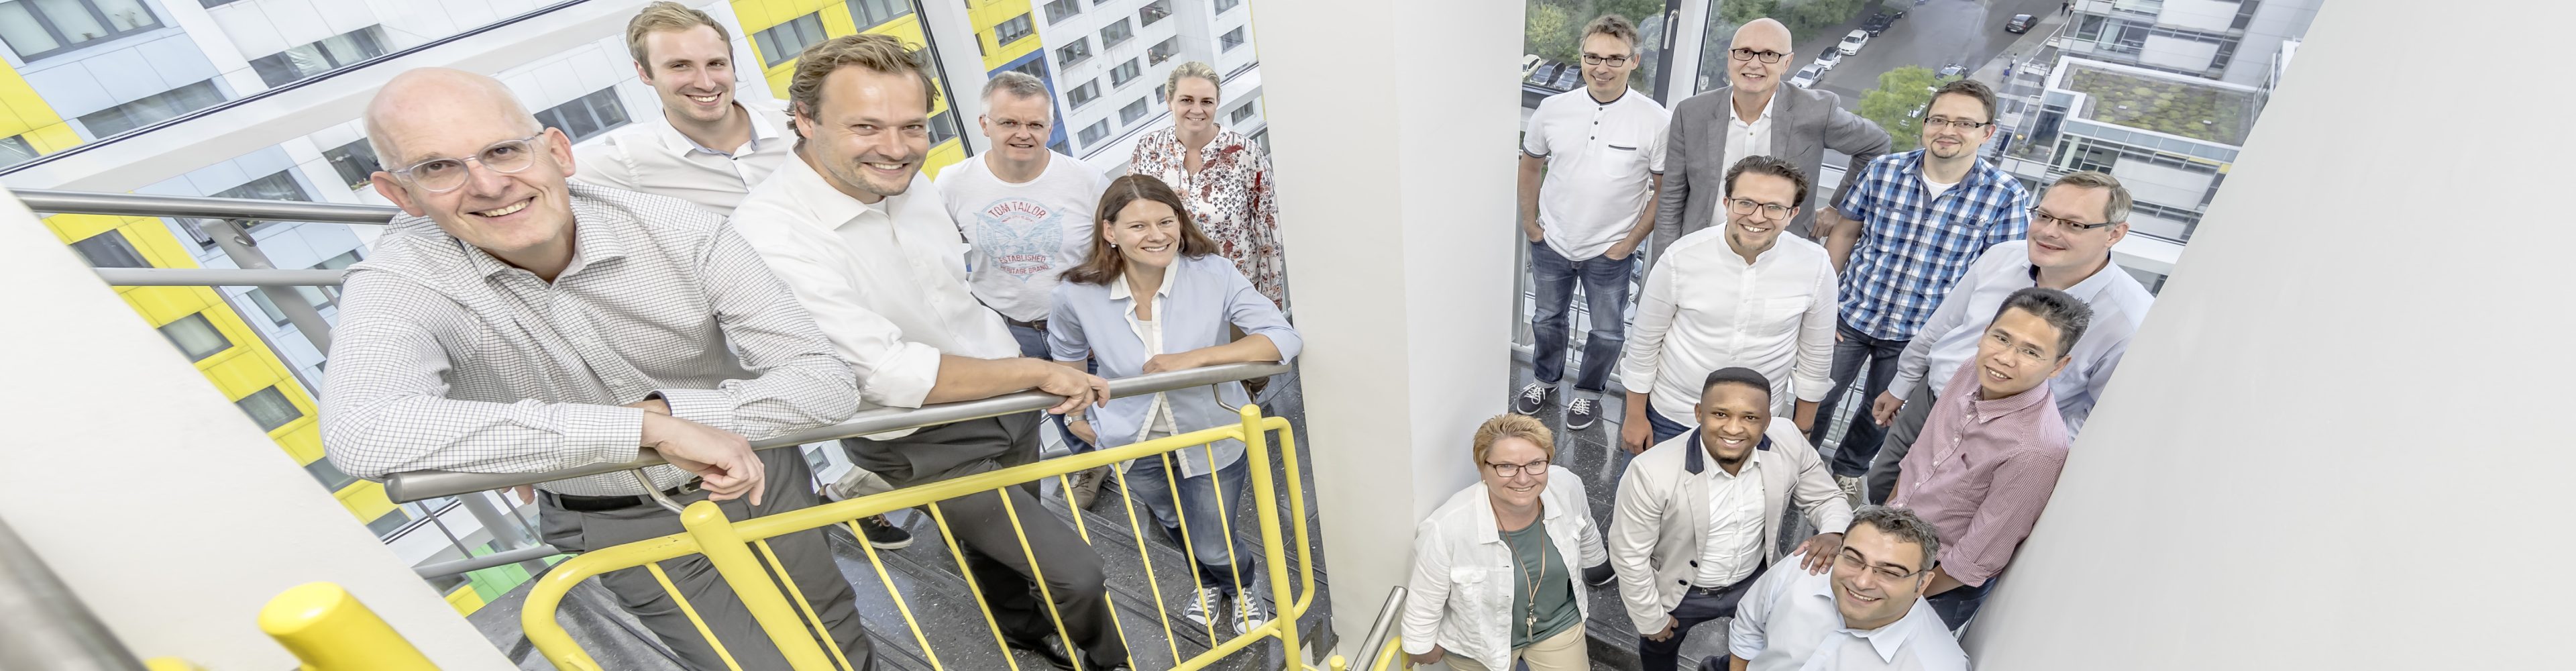 A photo of GEFEG employees 2019 in a stairwell